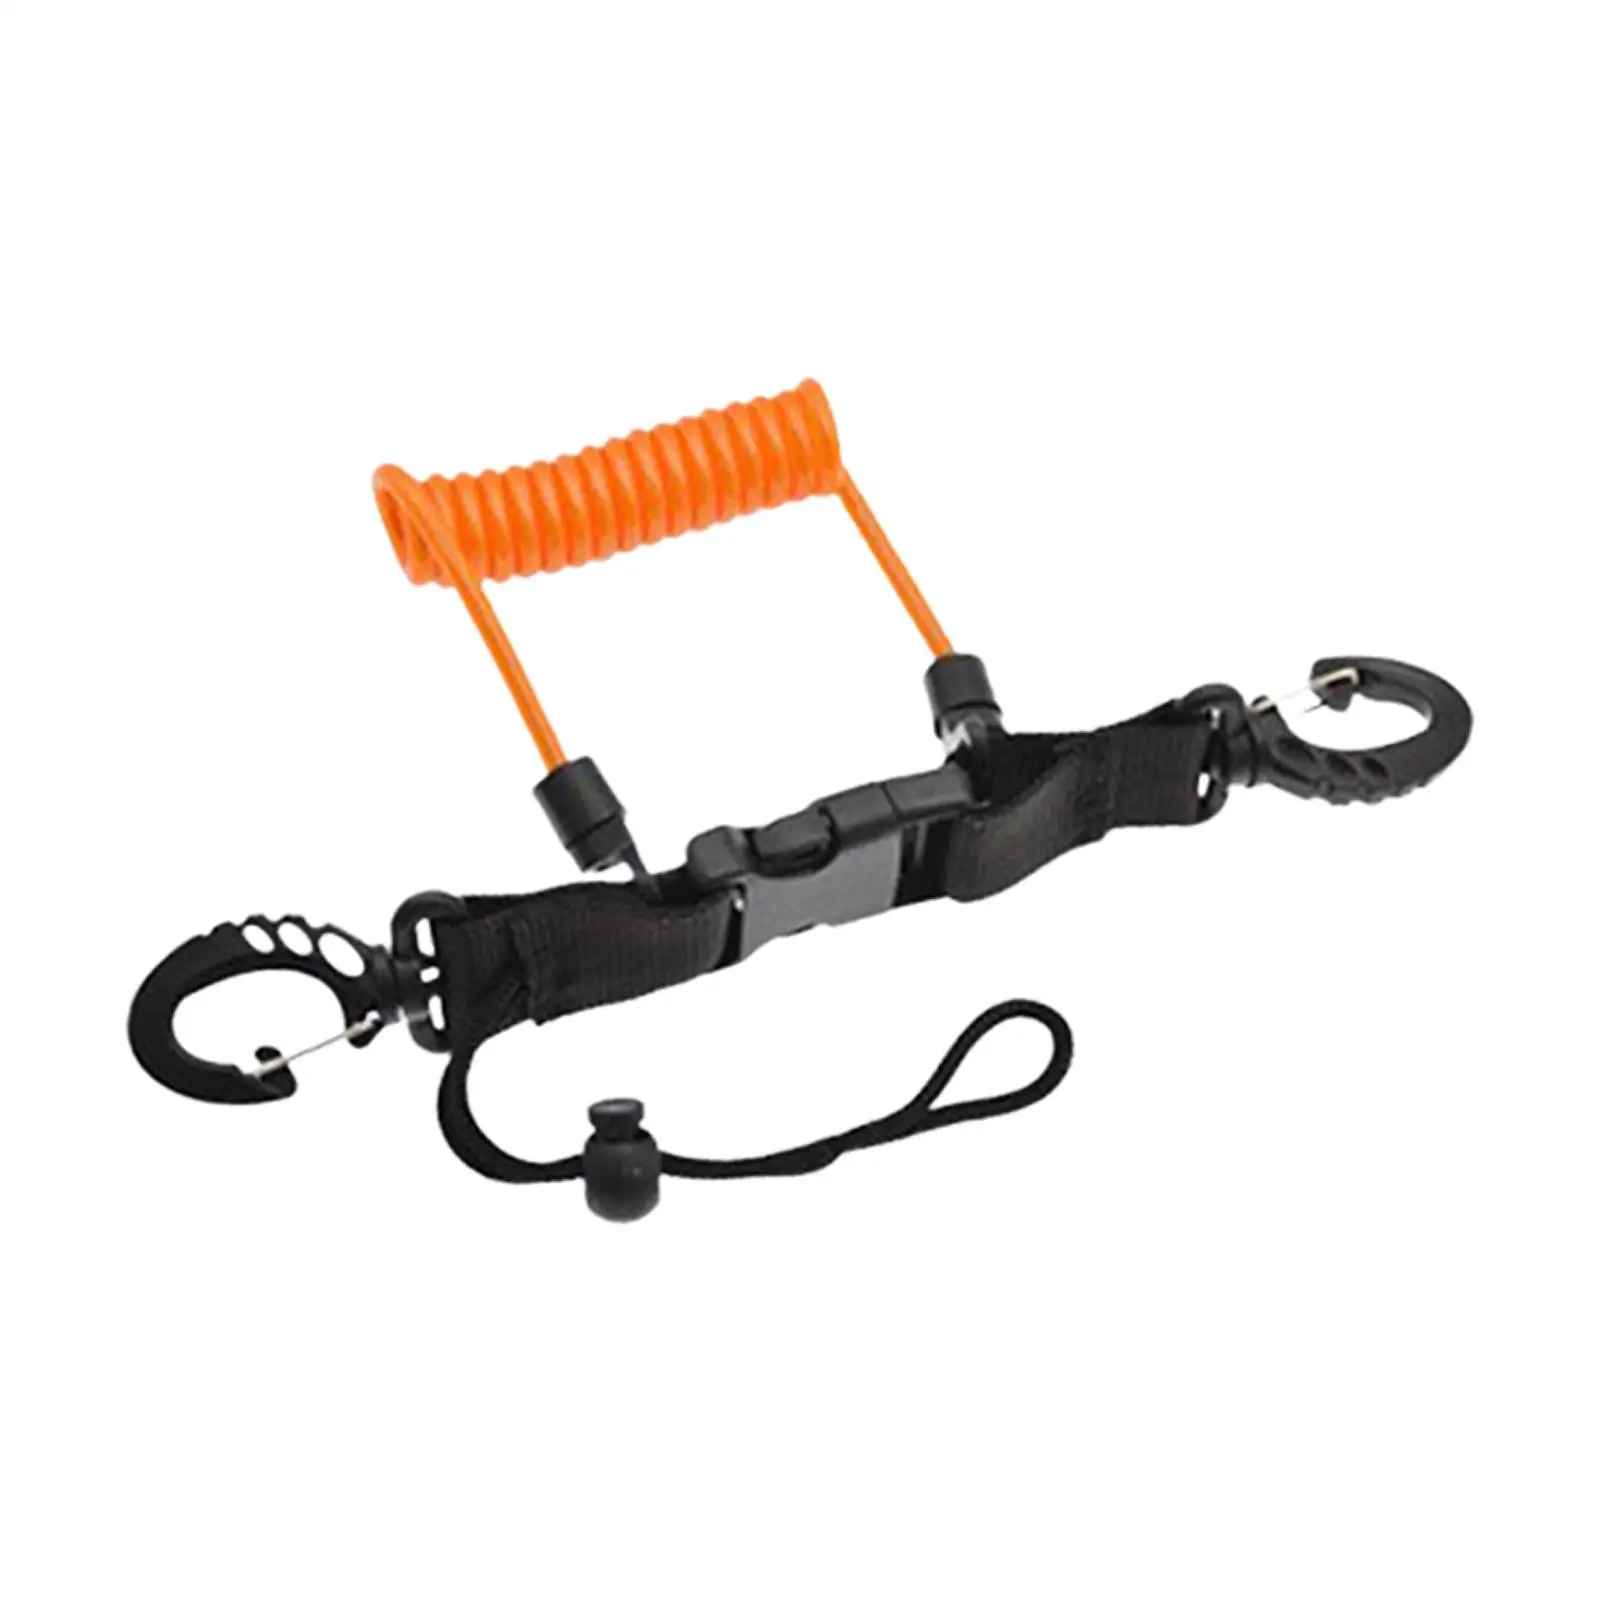 Scuba Diving Coil Lanyard Camera Coil Lanyard with Clips Straps Spring Coiled Lanyard Underwater Diving Tool for Water Sports